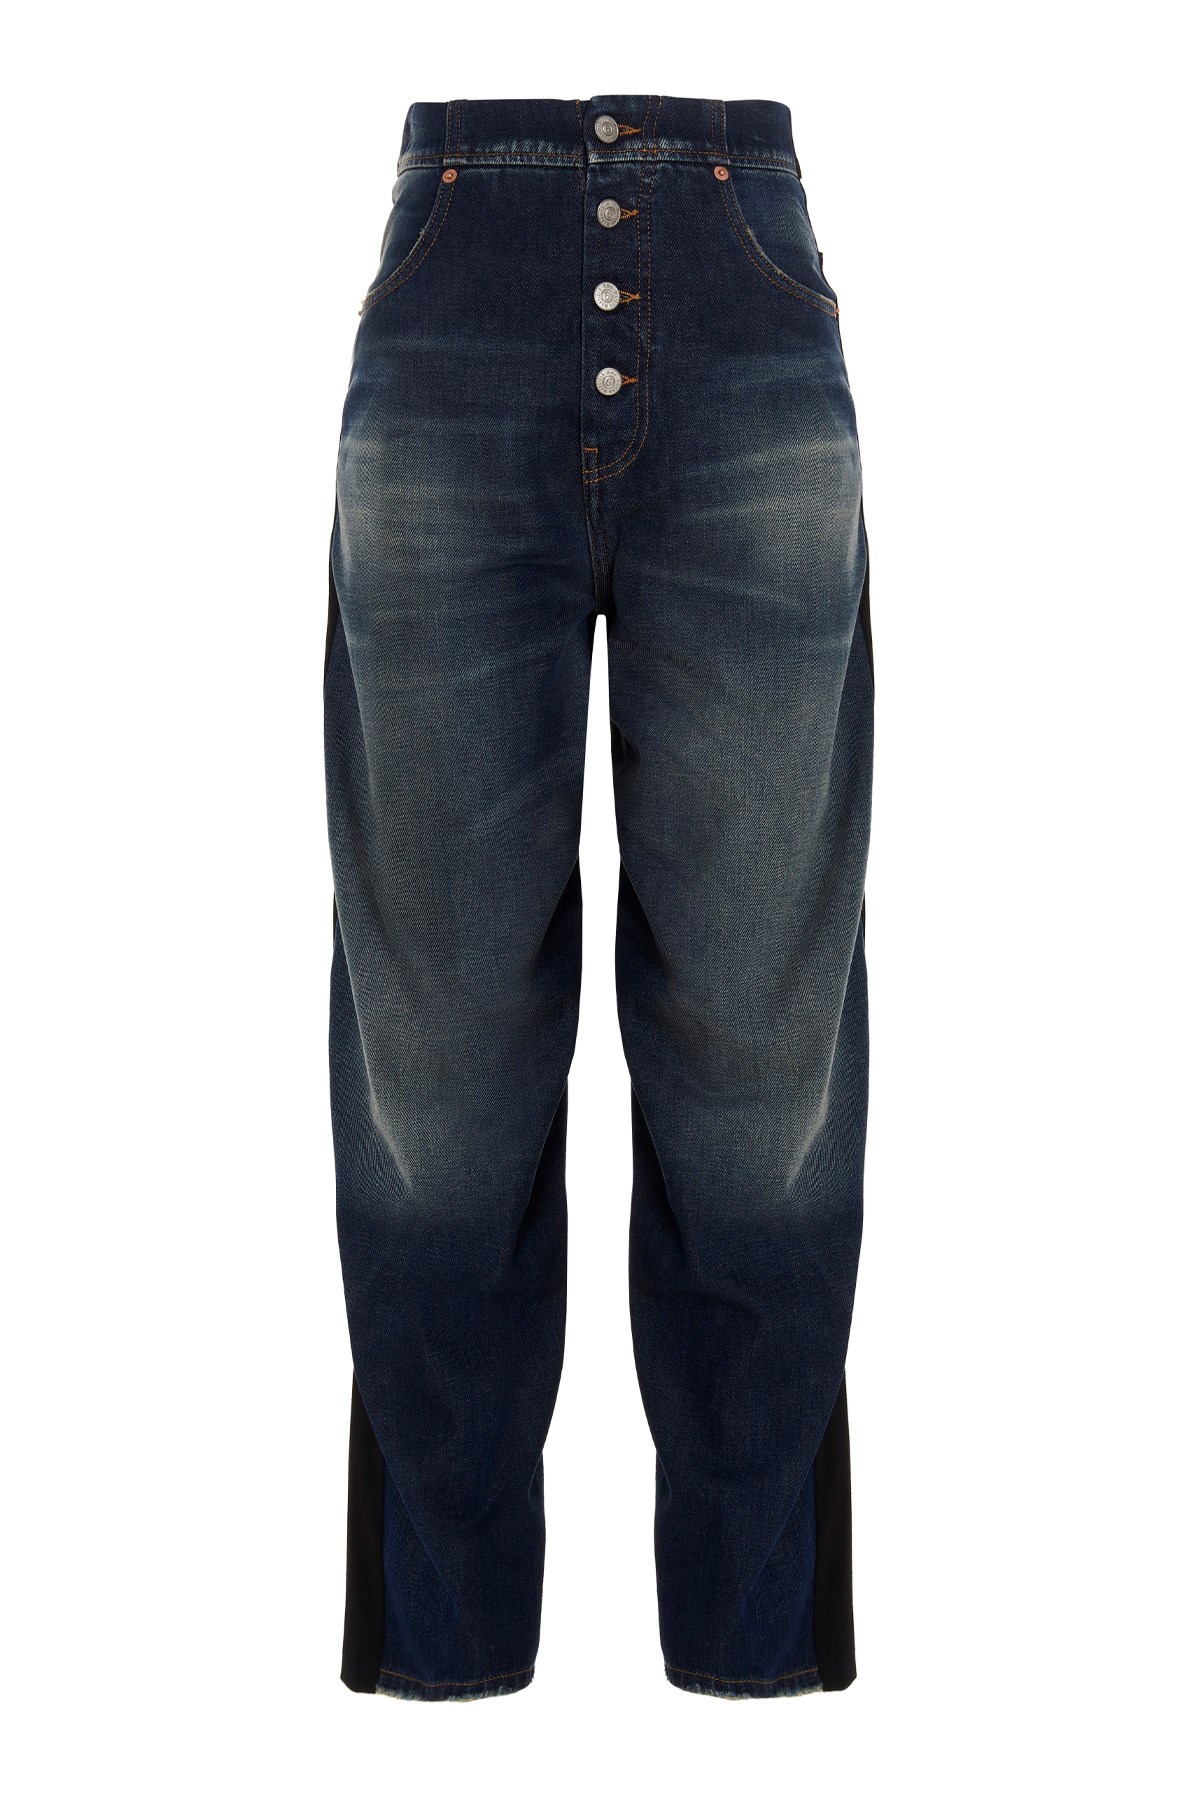 MM6 MAISON MARGIELA Two-Material Jeans